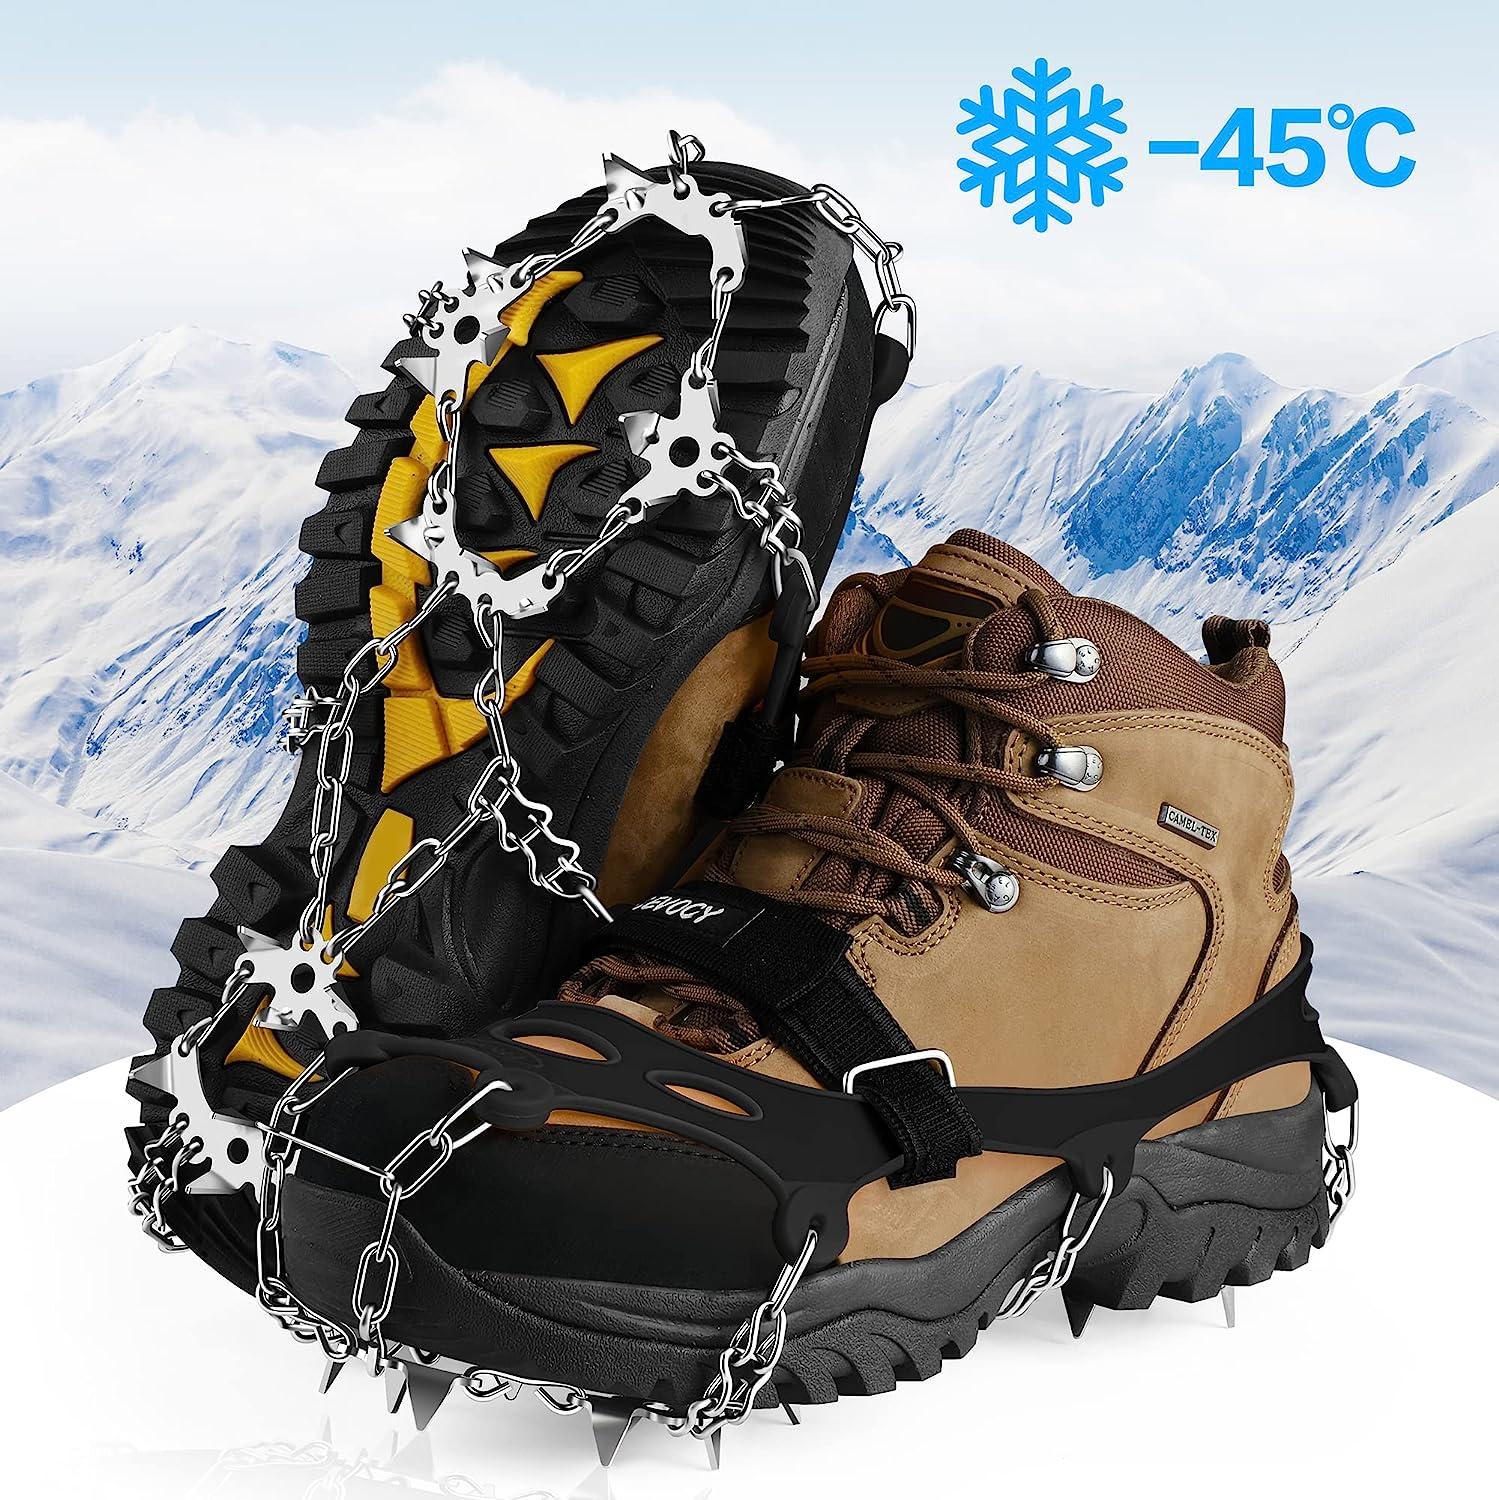 LECEVOCY Crampons, Ice Cleats for Shoes and Boots, 19 Spikes Stainless  Steel Snow Cleats, Boots for Hiking On Ice & Snow Ground, Mountain Medium  Black